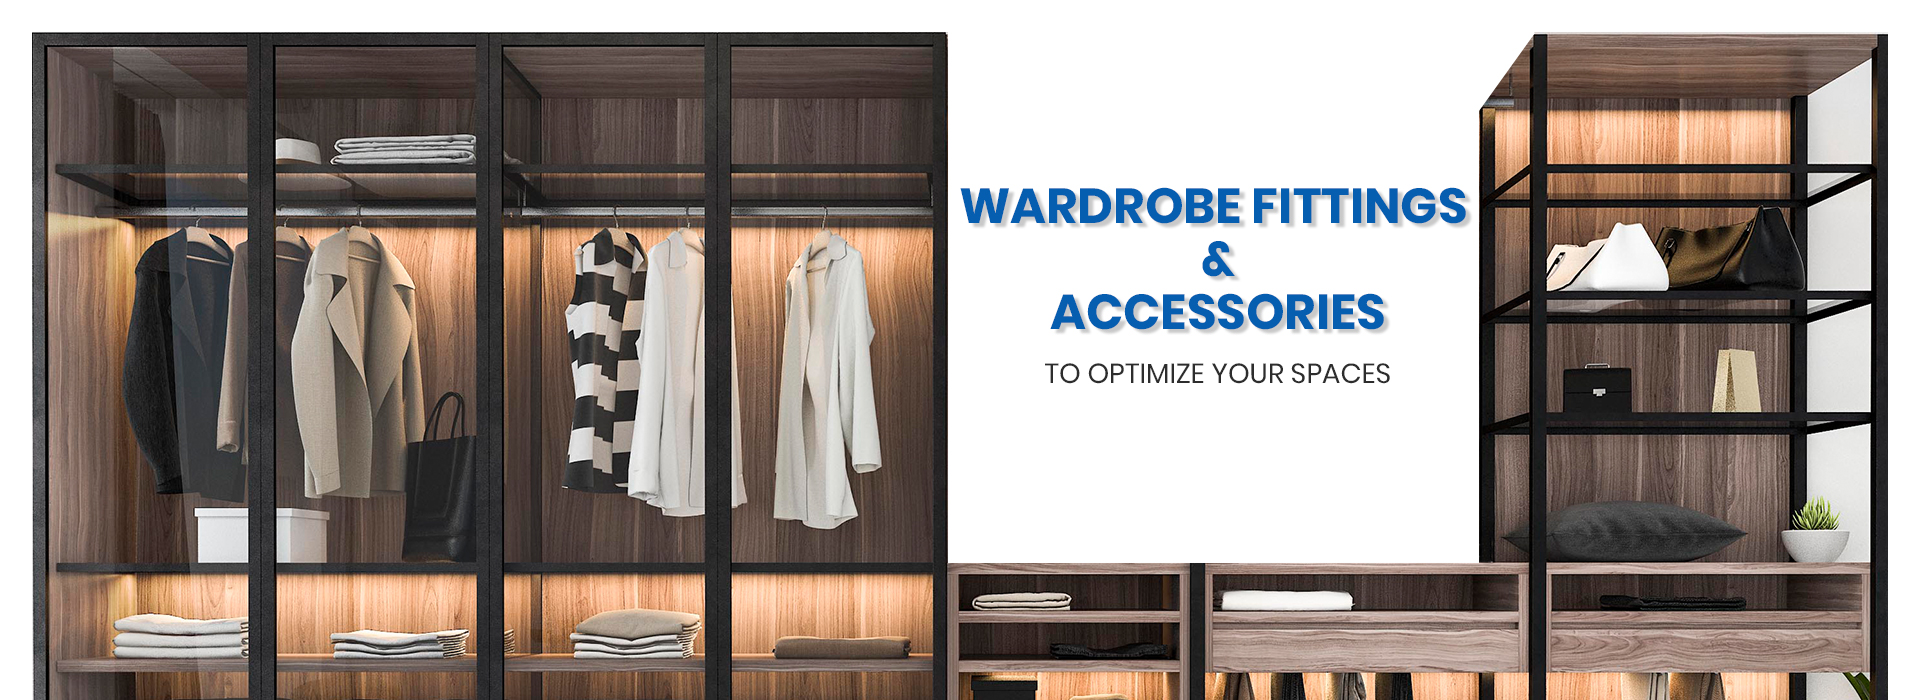 Wardrobe Fittings & Accessories To Optimize Your Spaces